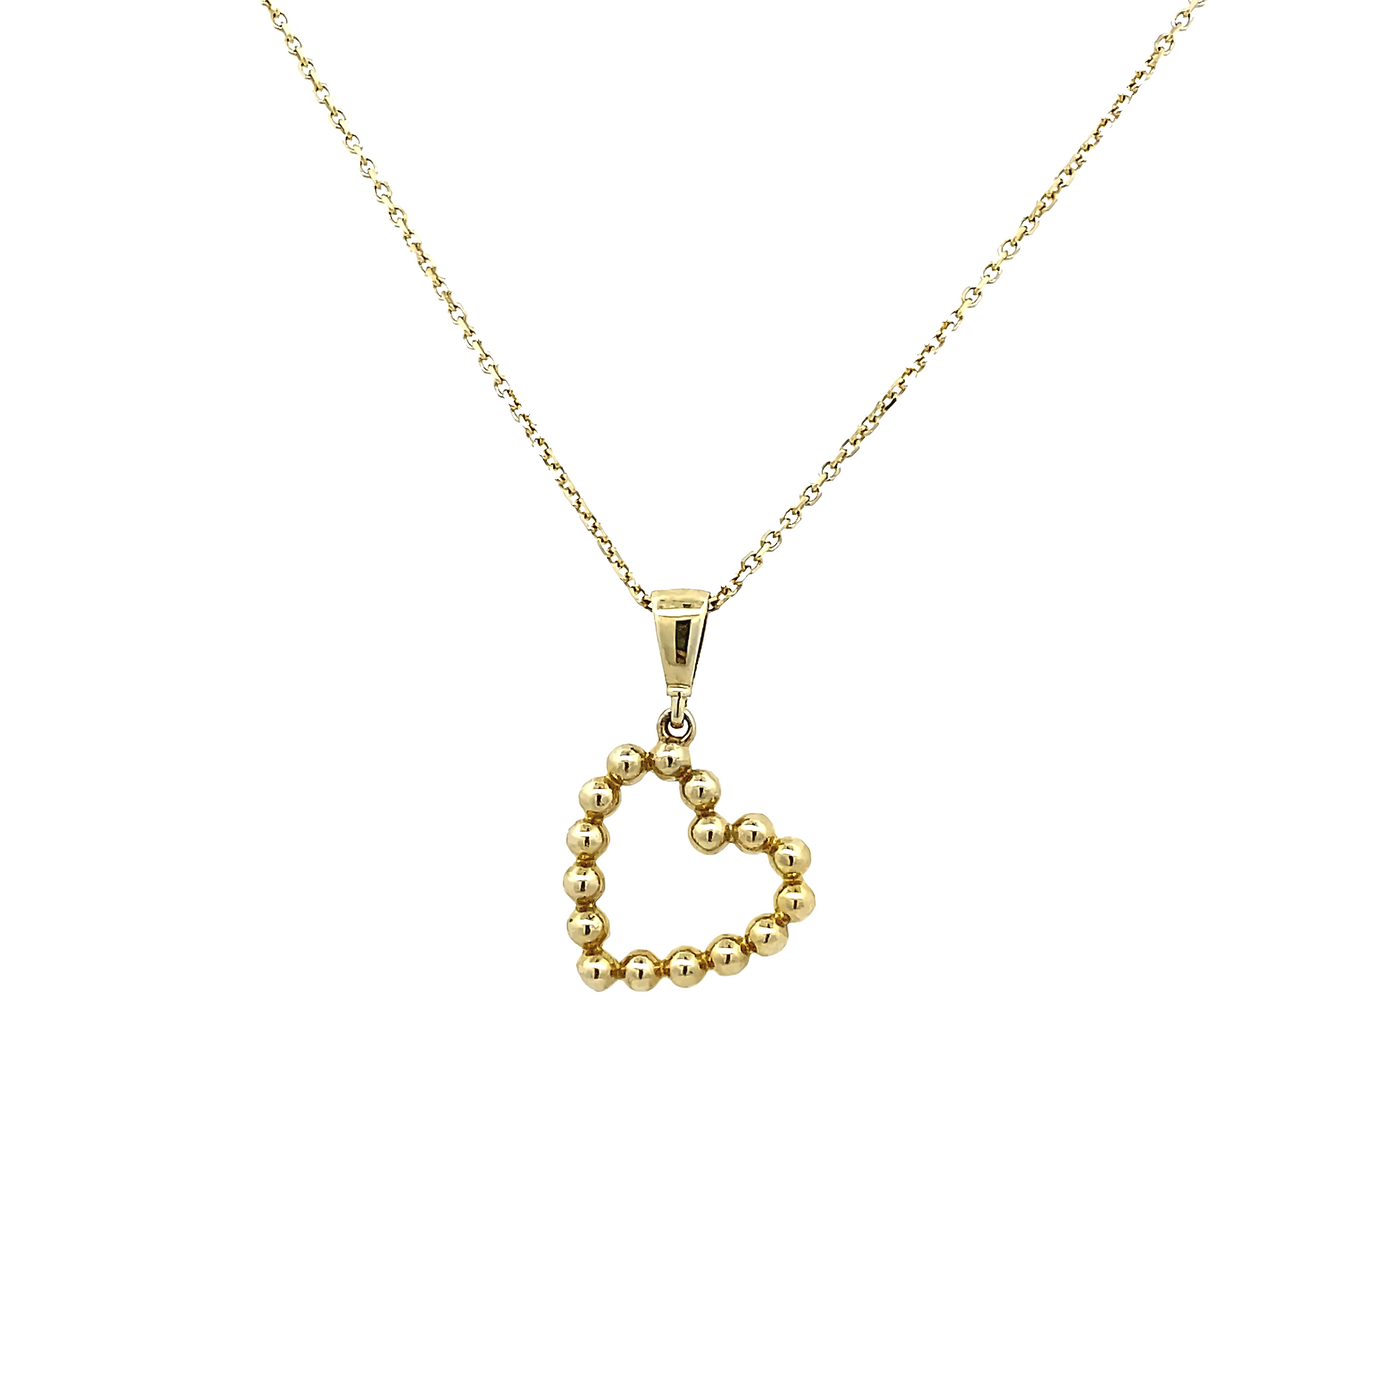 10 Karat Yellow Gold Beaded Floating Heart Necklace